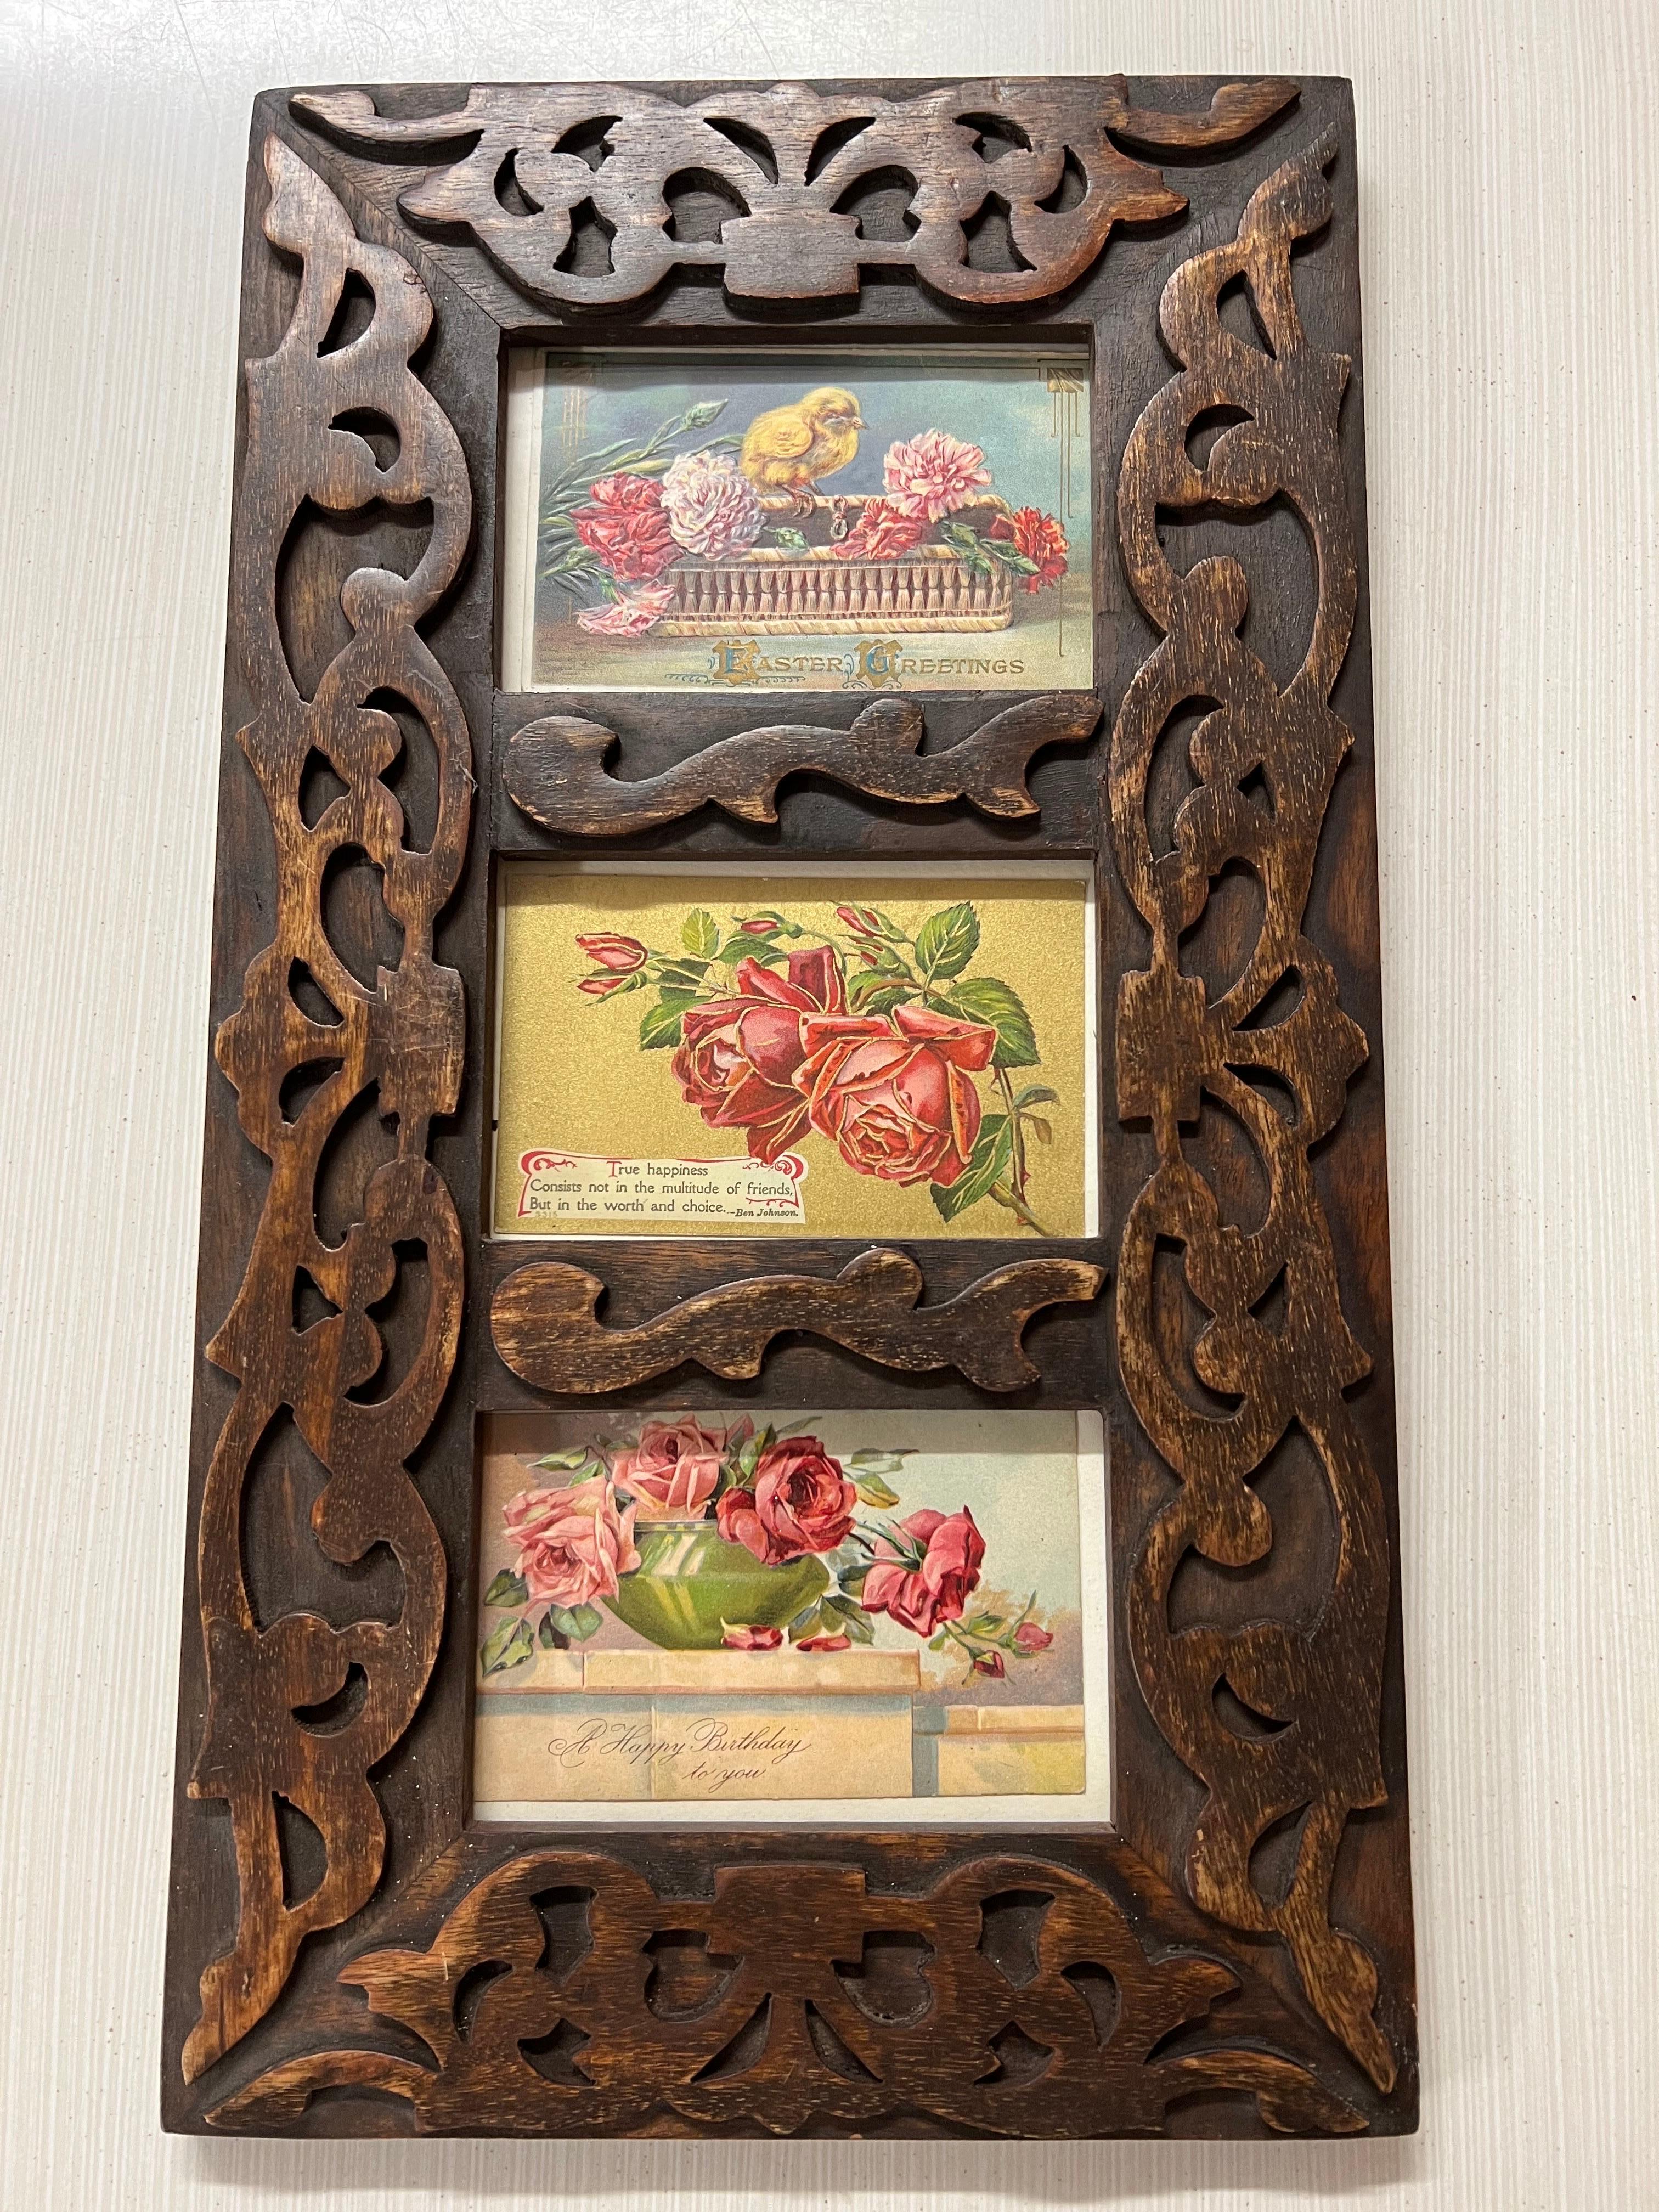 Set of Three Antique Postcards in a Carved Wooden Frame with glass panels. They are all authentic antique postcards , not reproductions. The top card is an Antique Easter Card embellished with flowers and a baby chic. The second one is a greeting